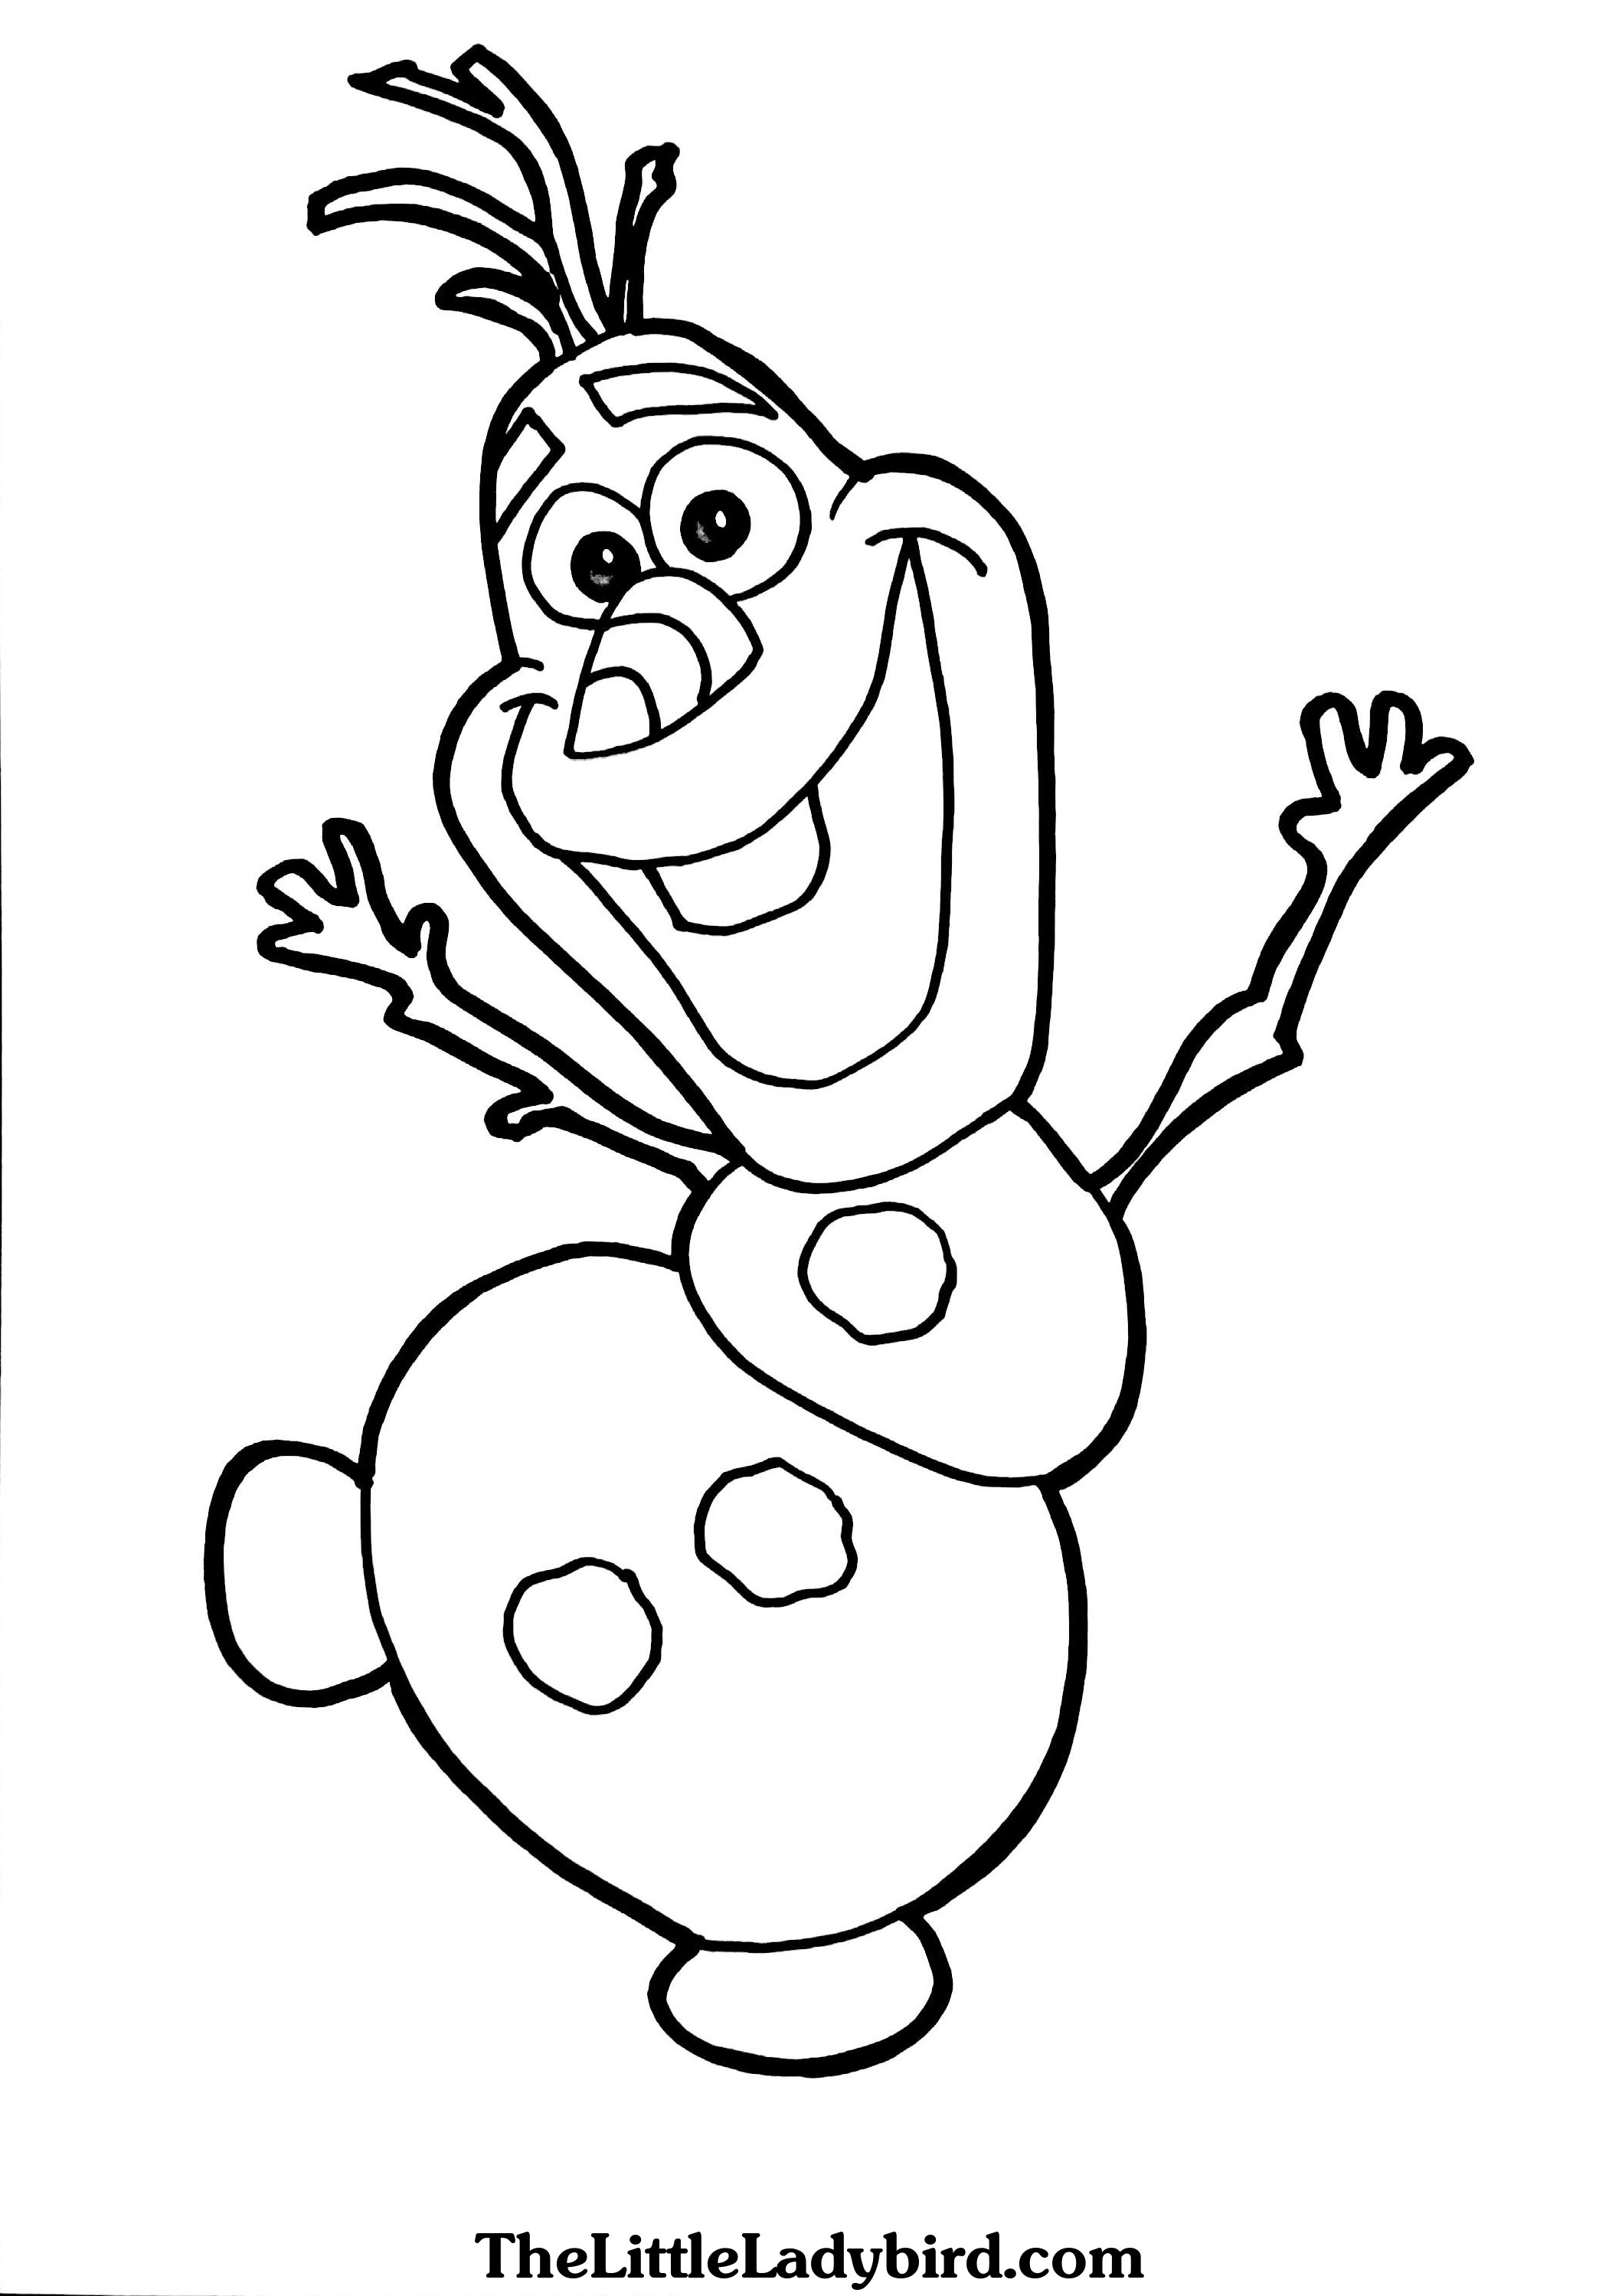 Nose Coloring Page at Free printable colorings pages